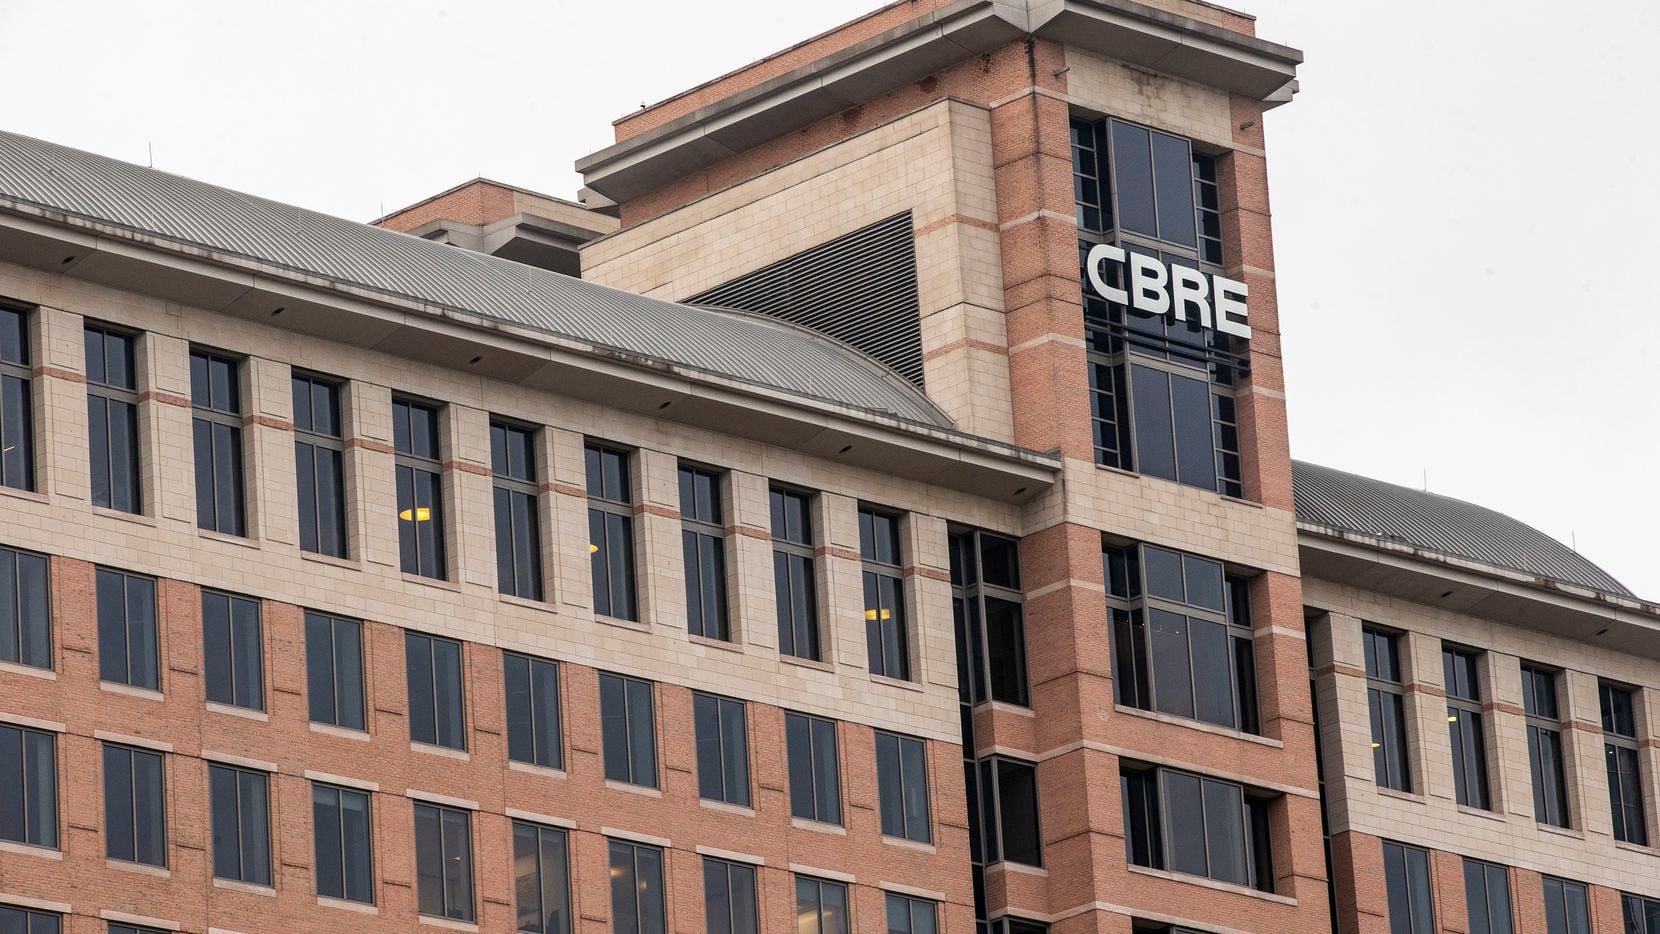 CBRE's profits fell 70% in the first quarter.